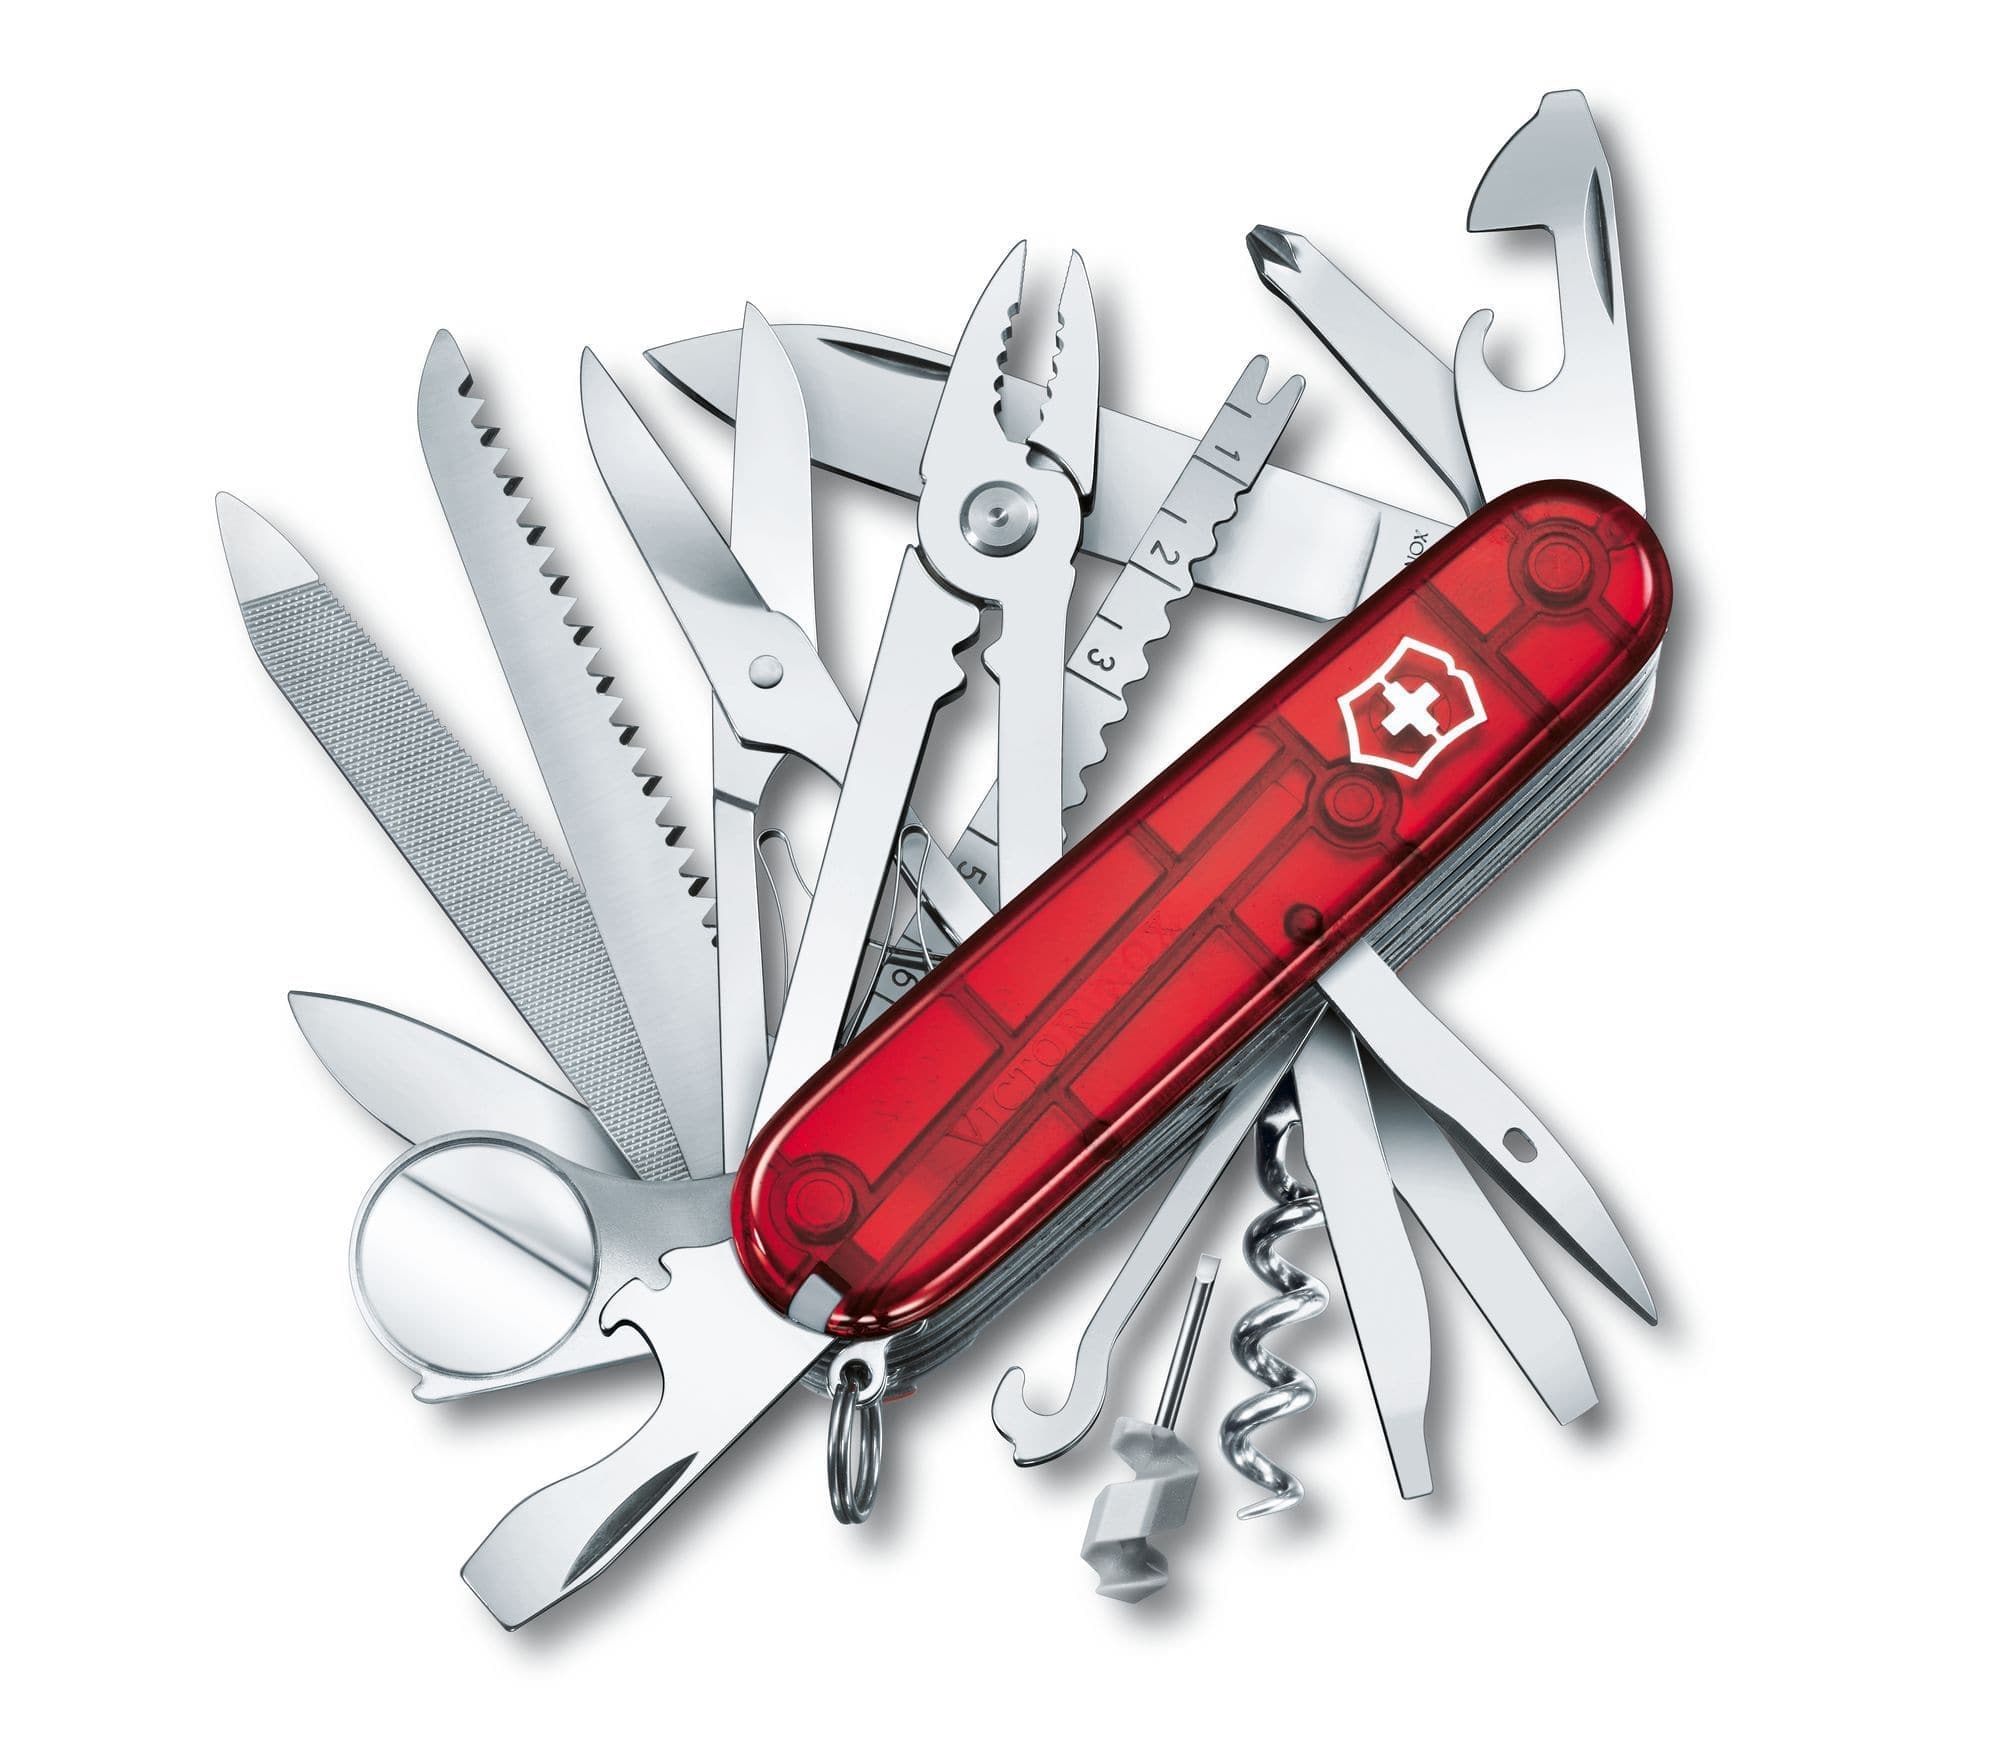 VICTORINOX SWISS ARMY KNIFE SWISS CHAMP RED WITH 23 FUNCTIONS - 1.6795.T